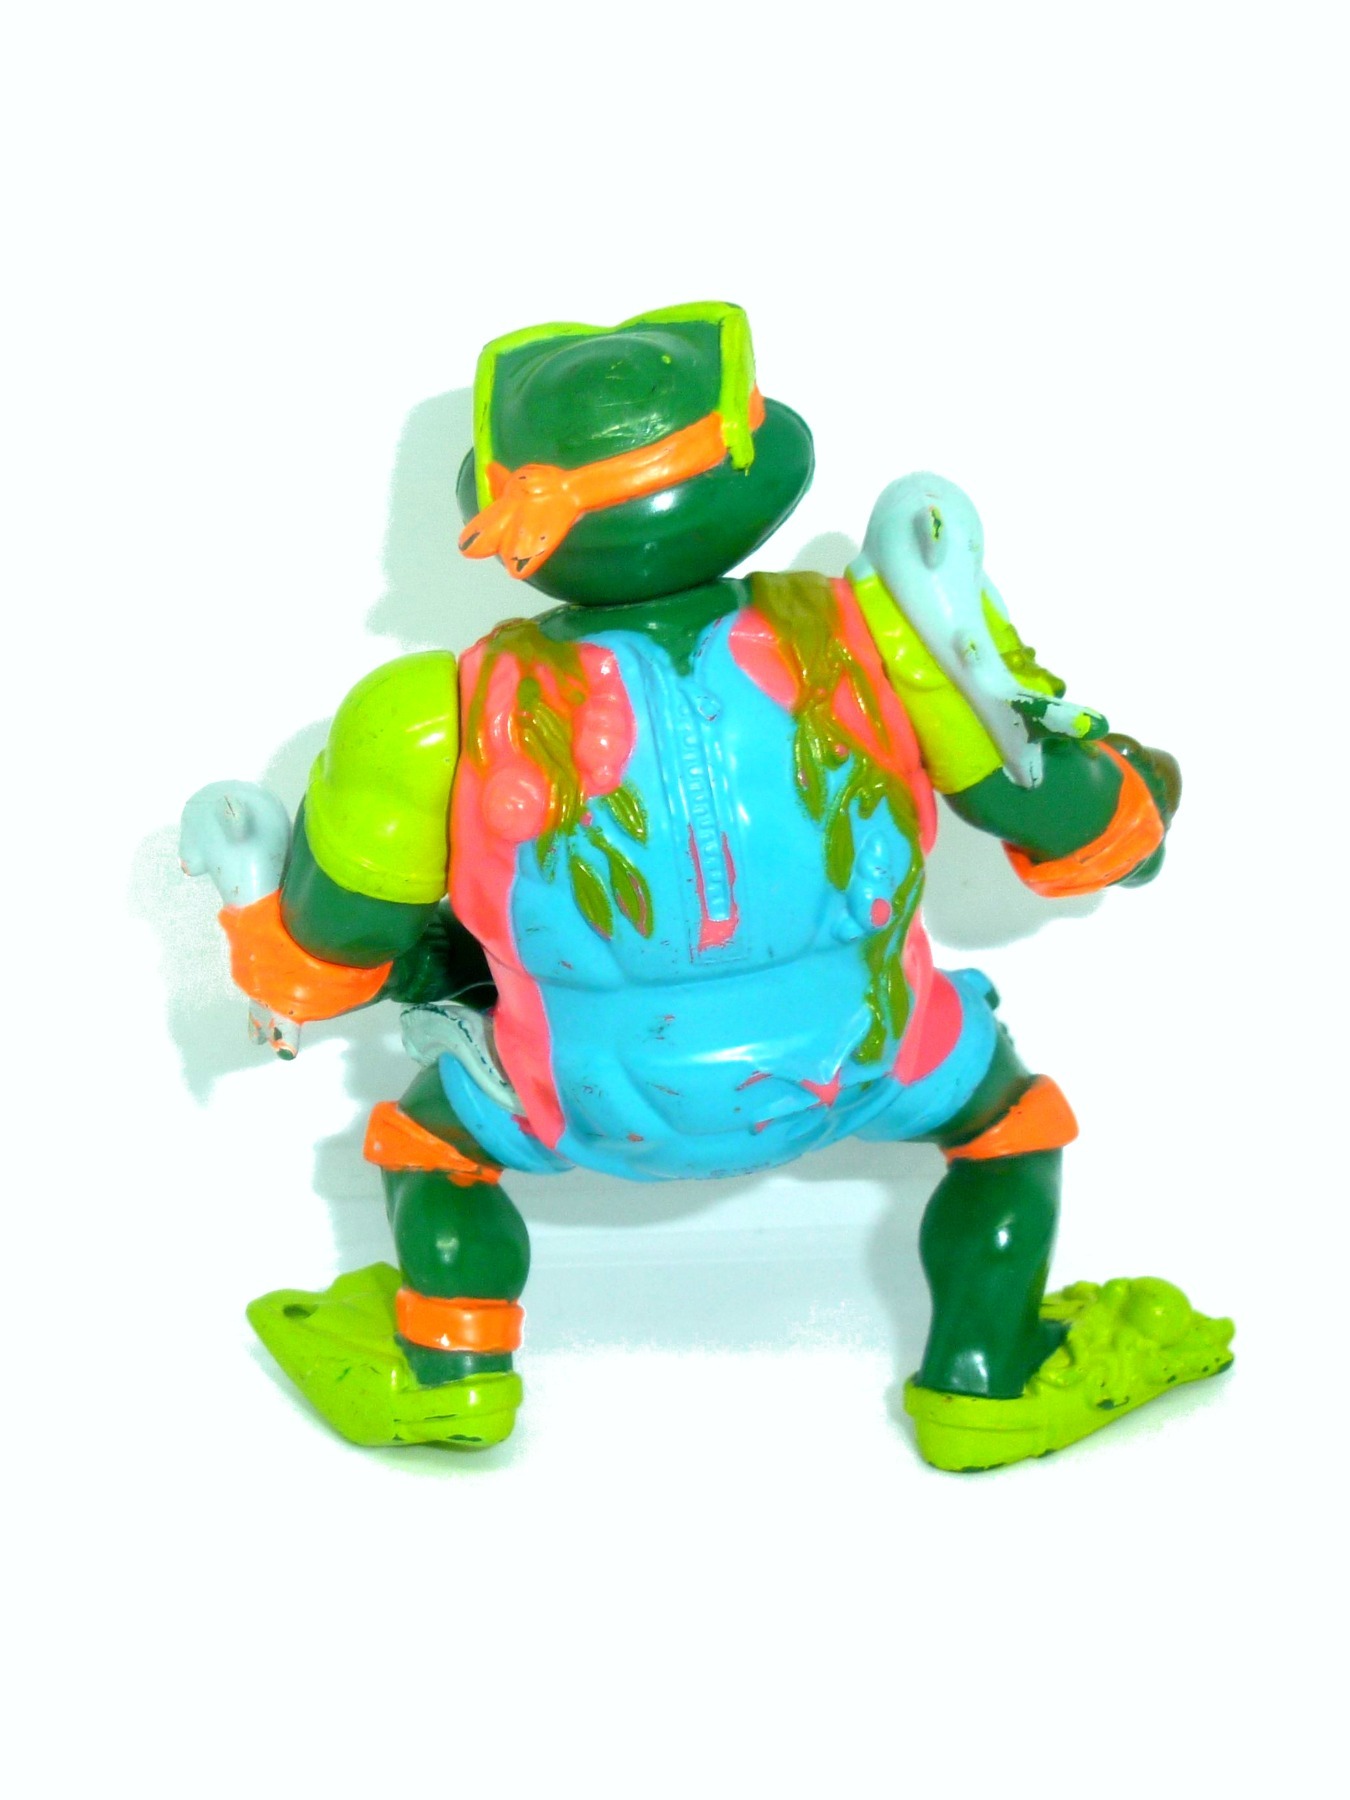 Mike the Sewer Surfer - Michelangelo 1990 Mirage Studios / Playmates Toys 4